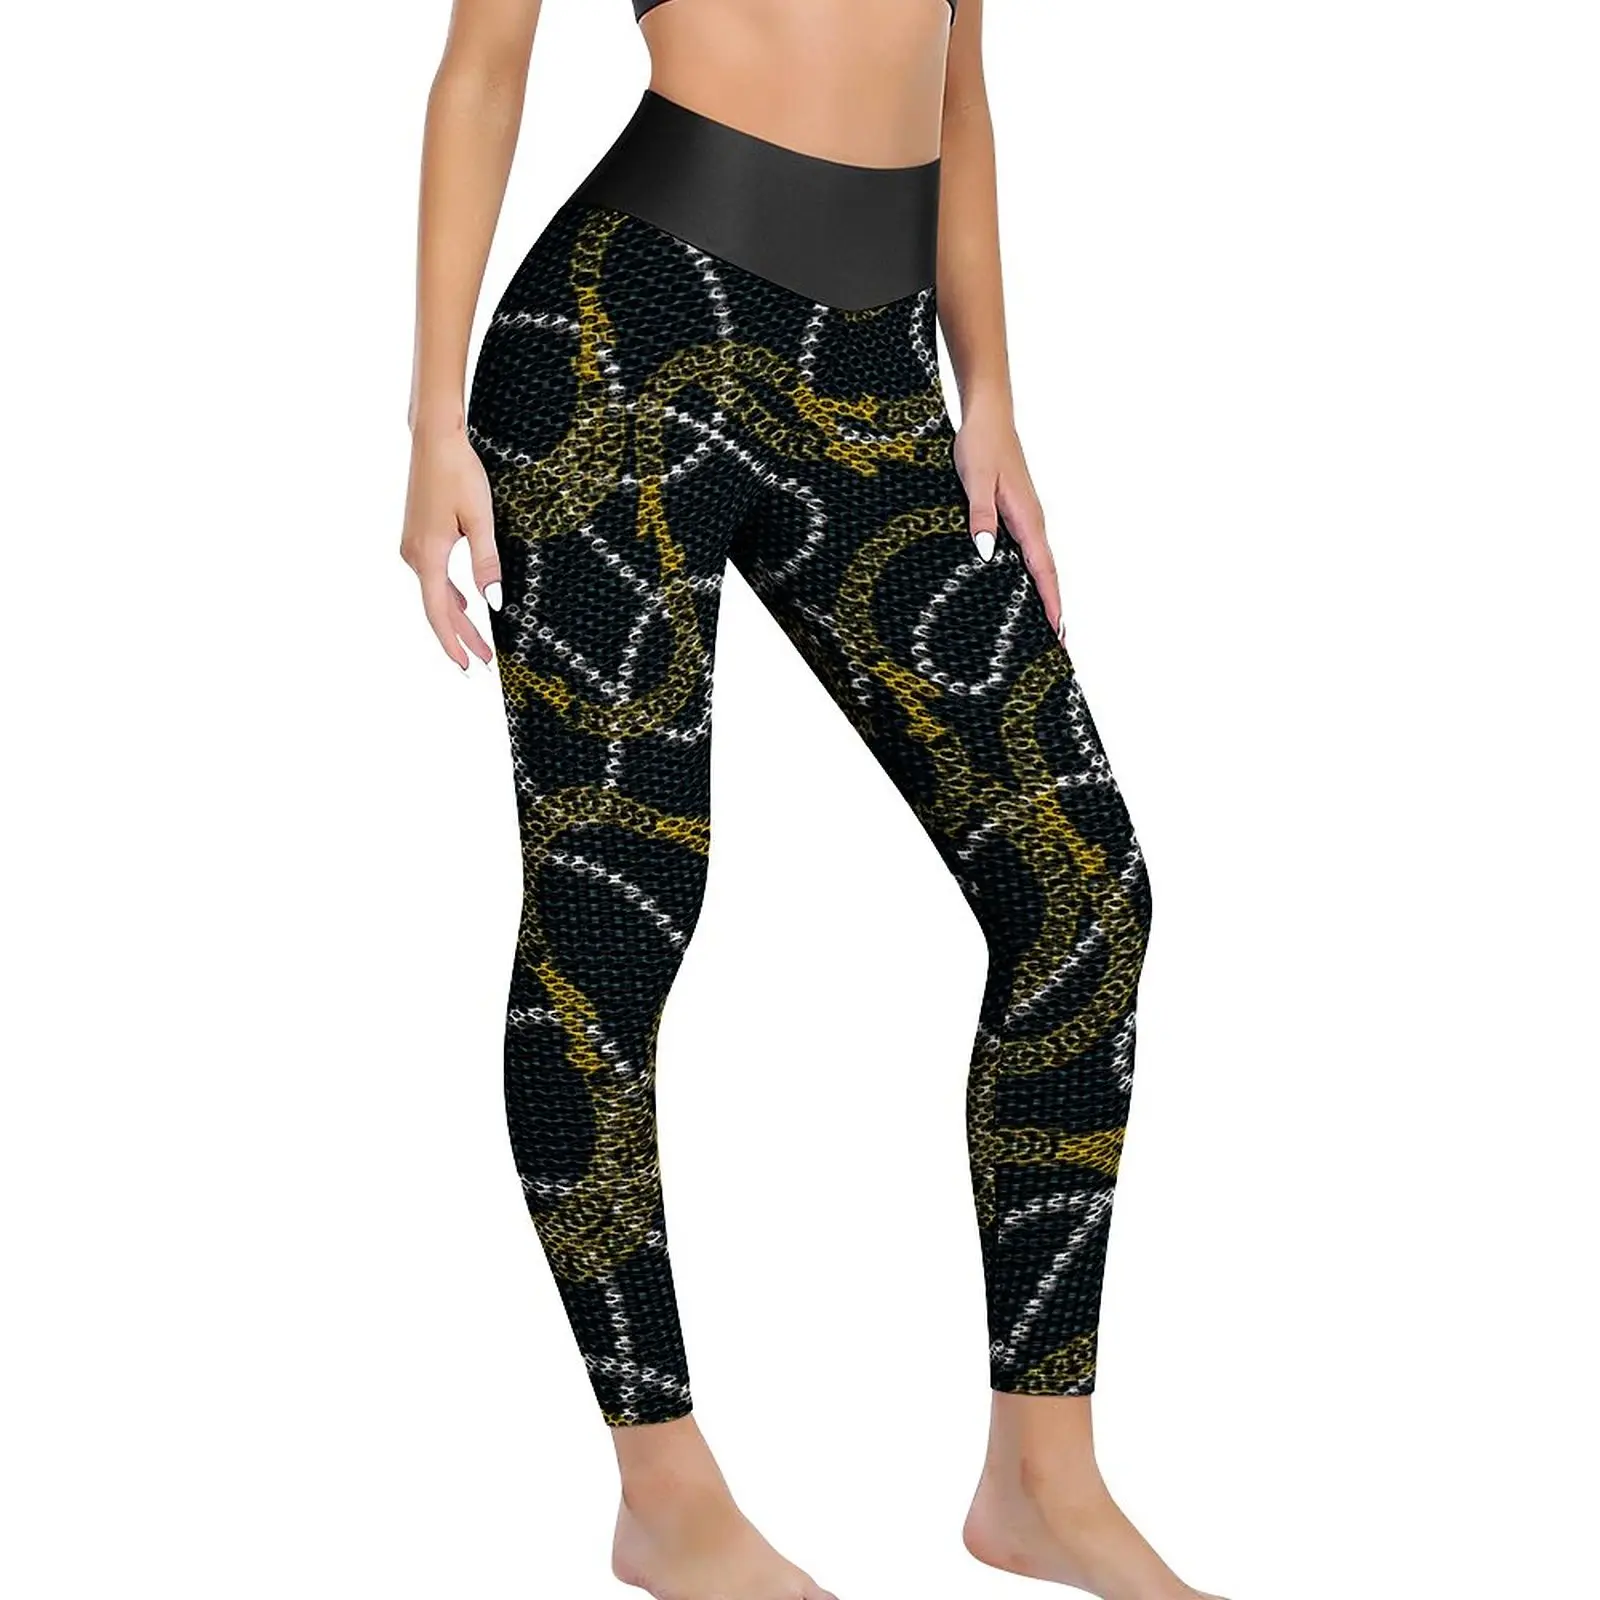 Gold Chains Leggings Sexy Modern Pearls Print Push Up Yoga Pants Breathable Seamless Leggins Women Graphic Workout Sports Tights